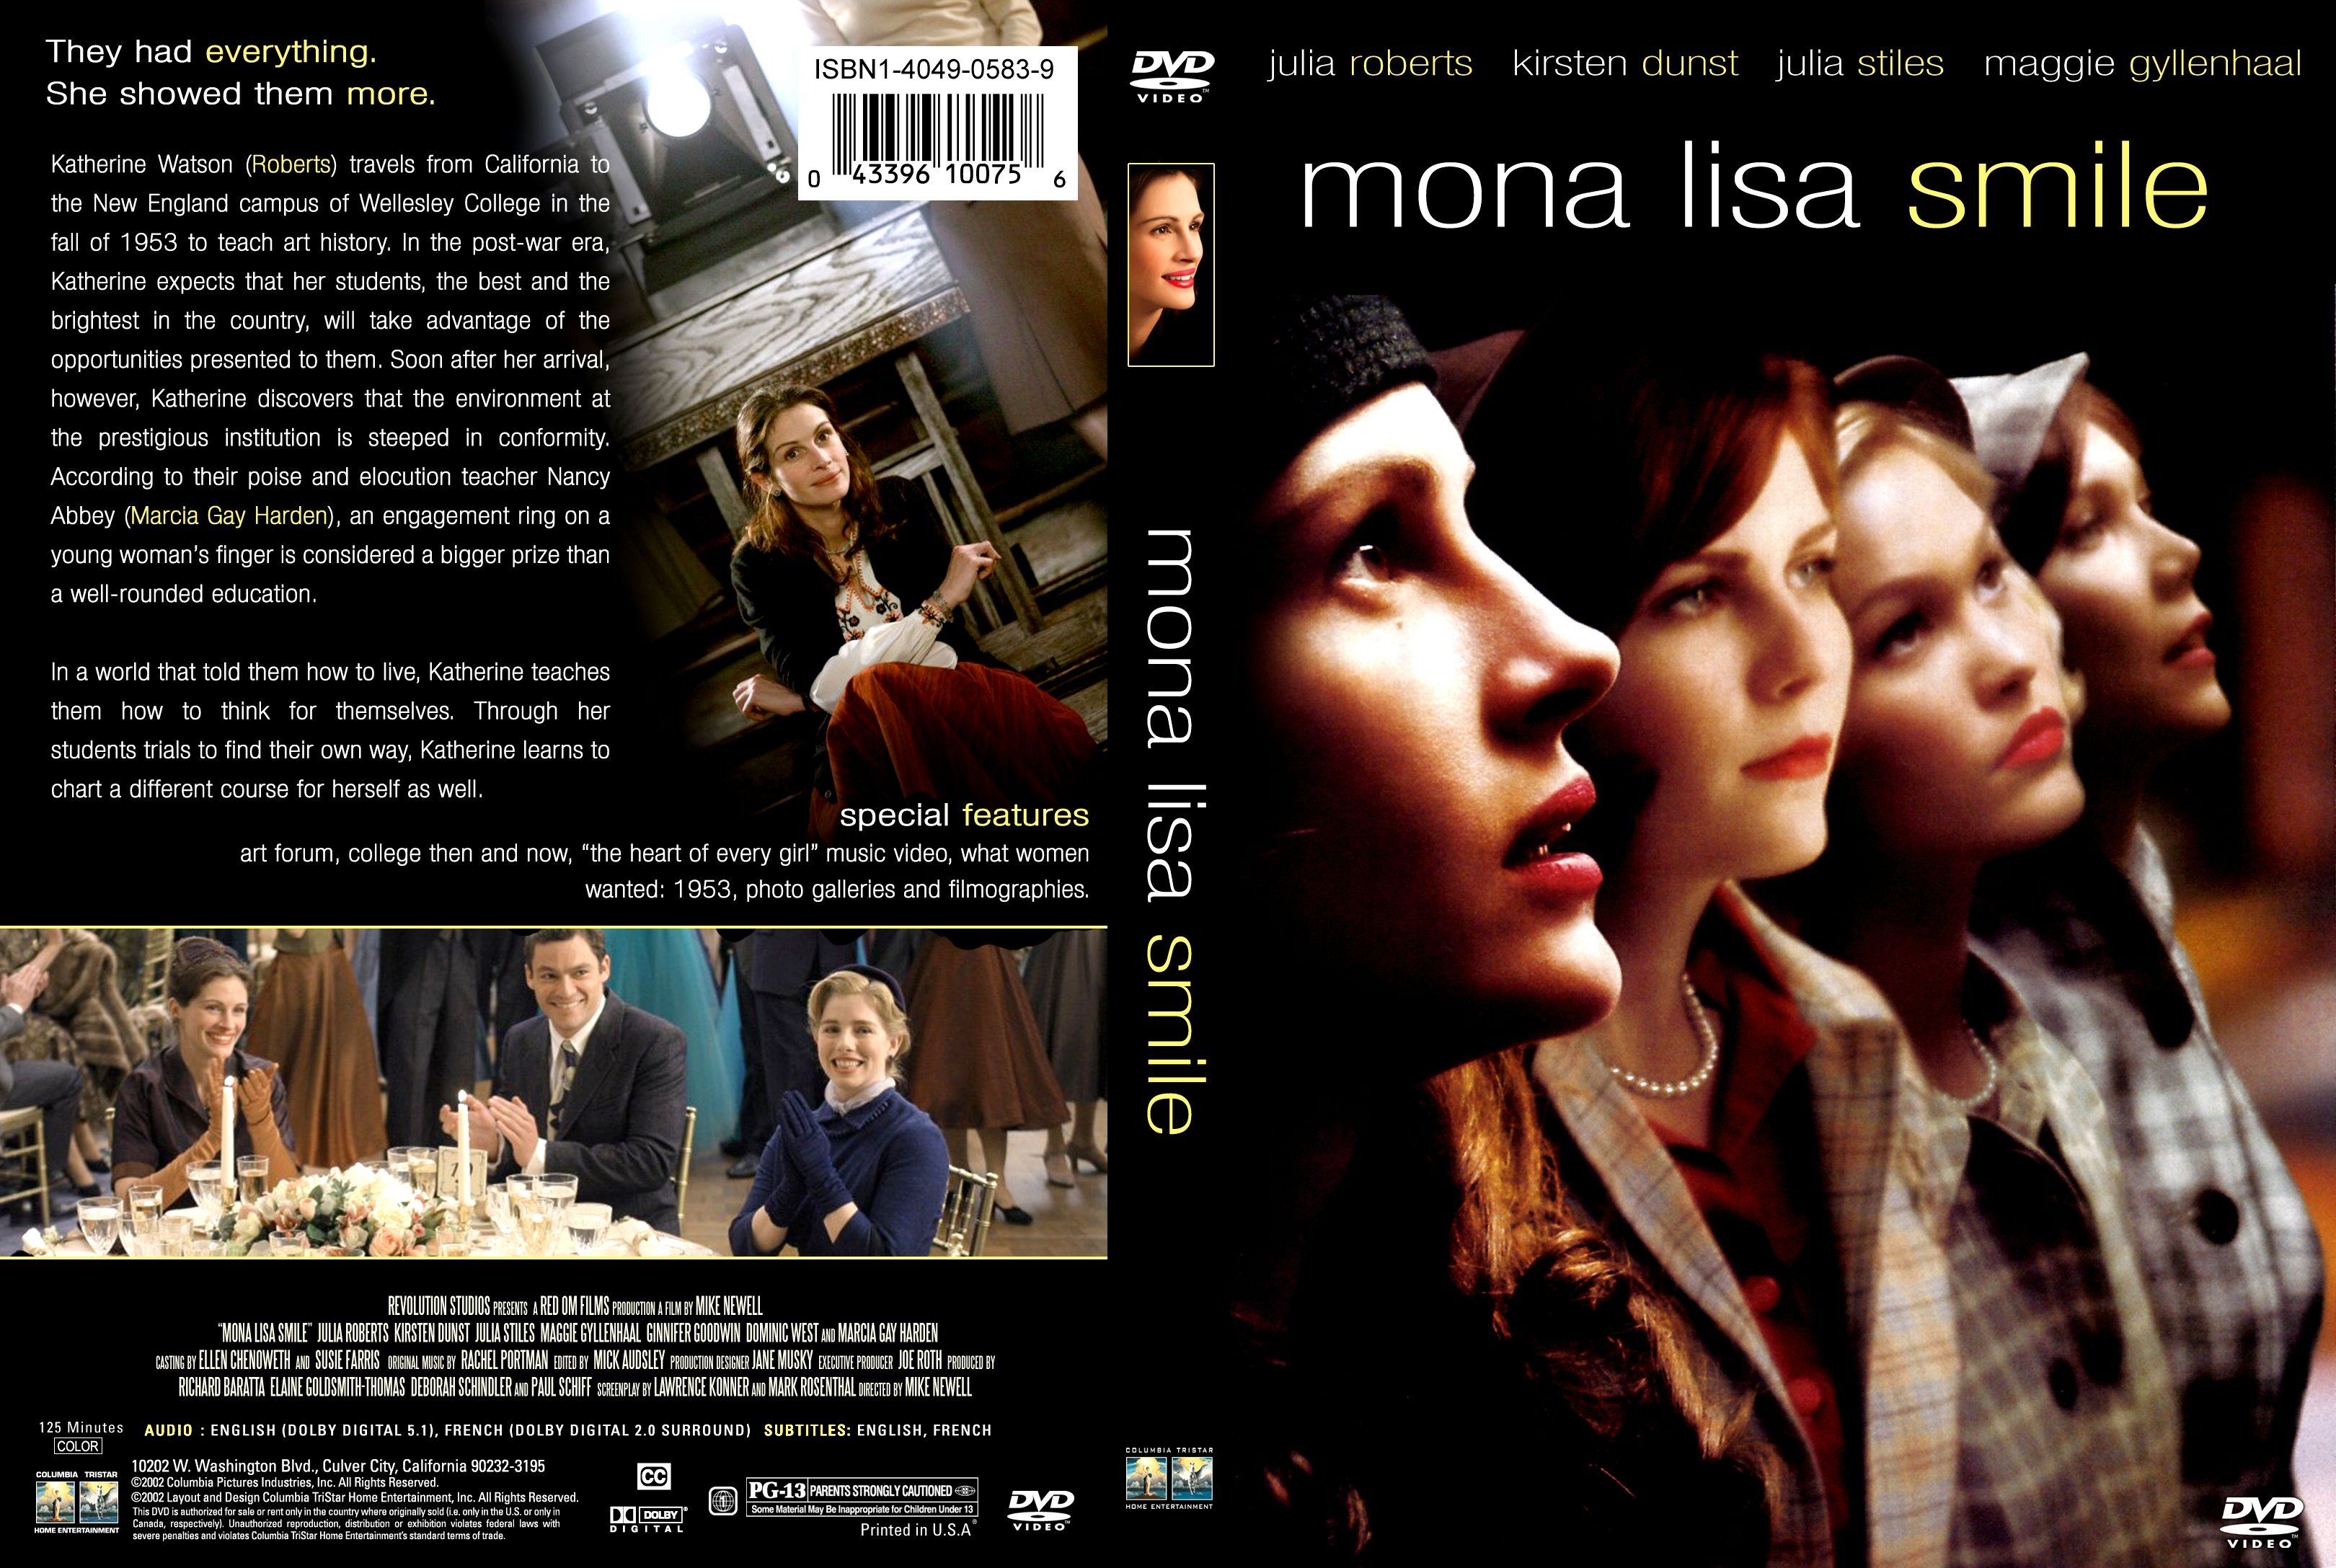 Mona Lisa Smile R1 Cstm 3 Misc Dvd Dvd Covers Cover Century Over 500 000 Album Art Covers For Free